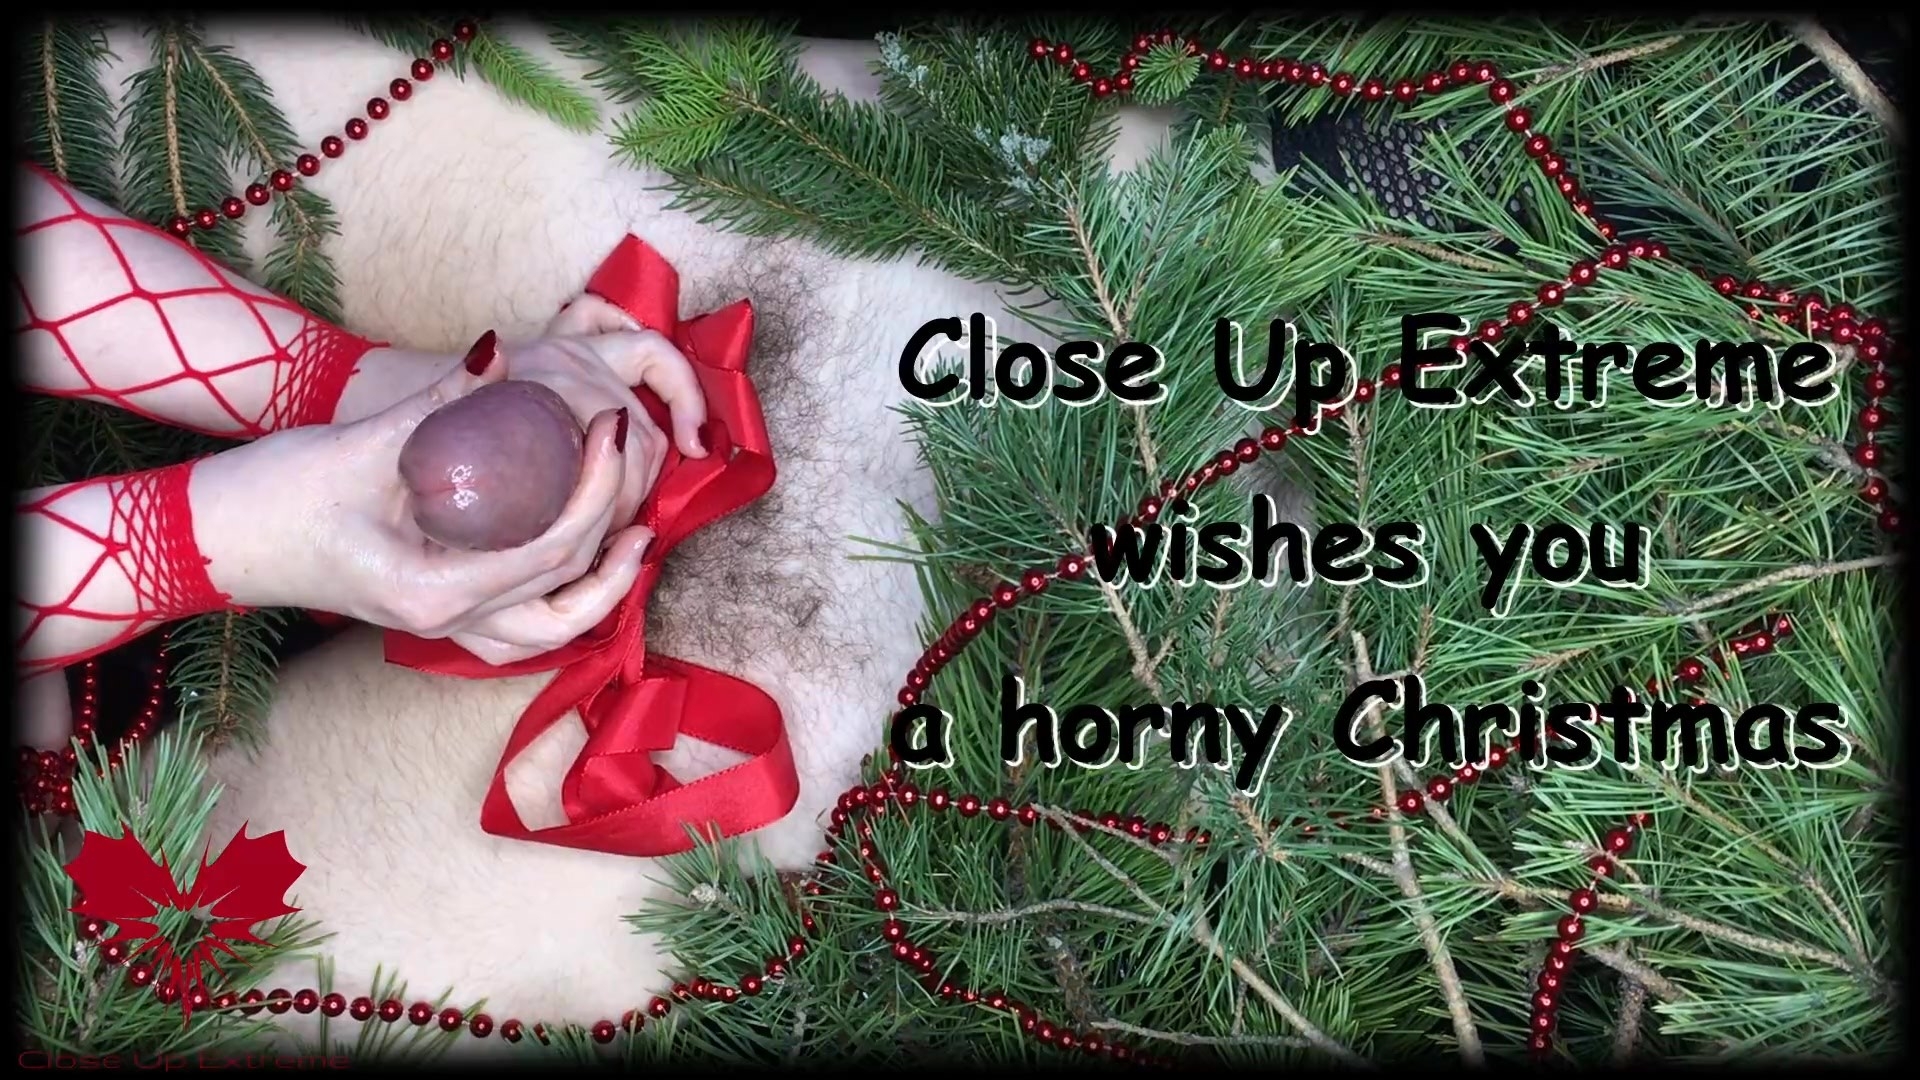 Close Up Extreme -  Close Up Extreme wishes you a horny Christmas